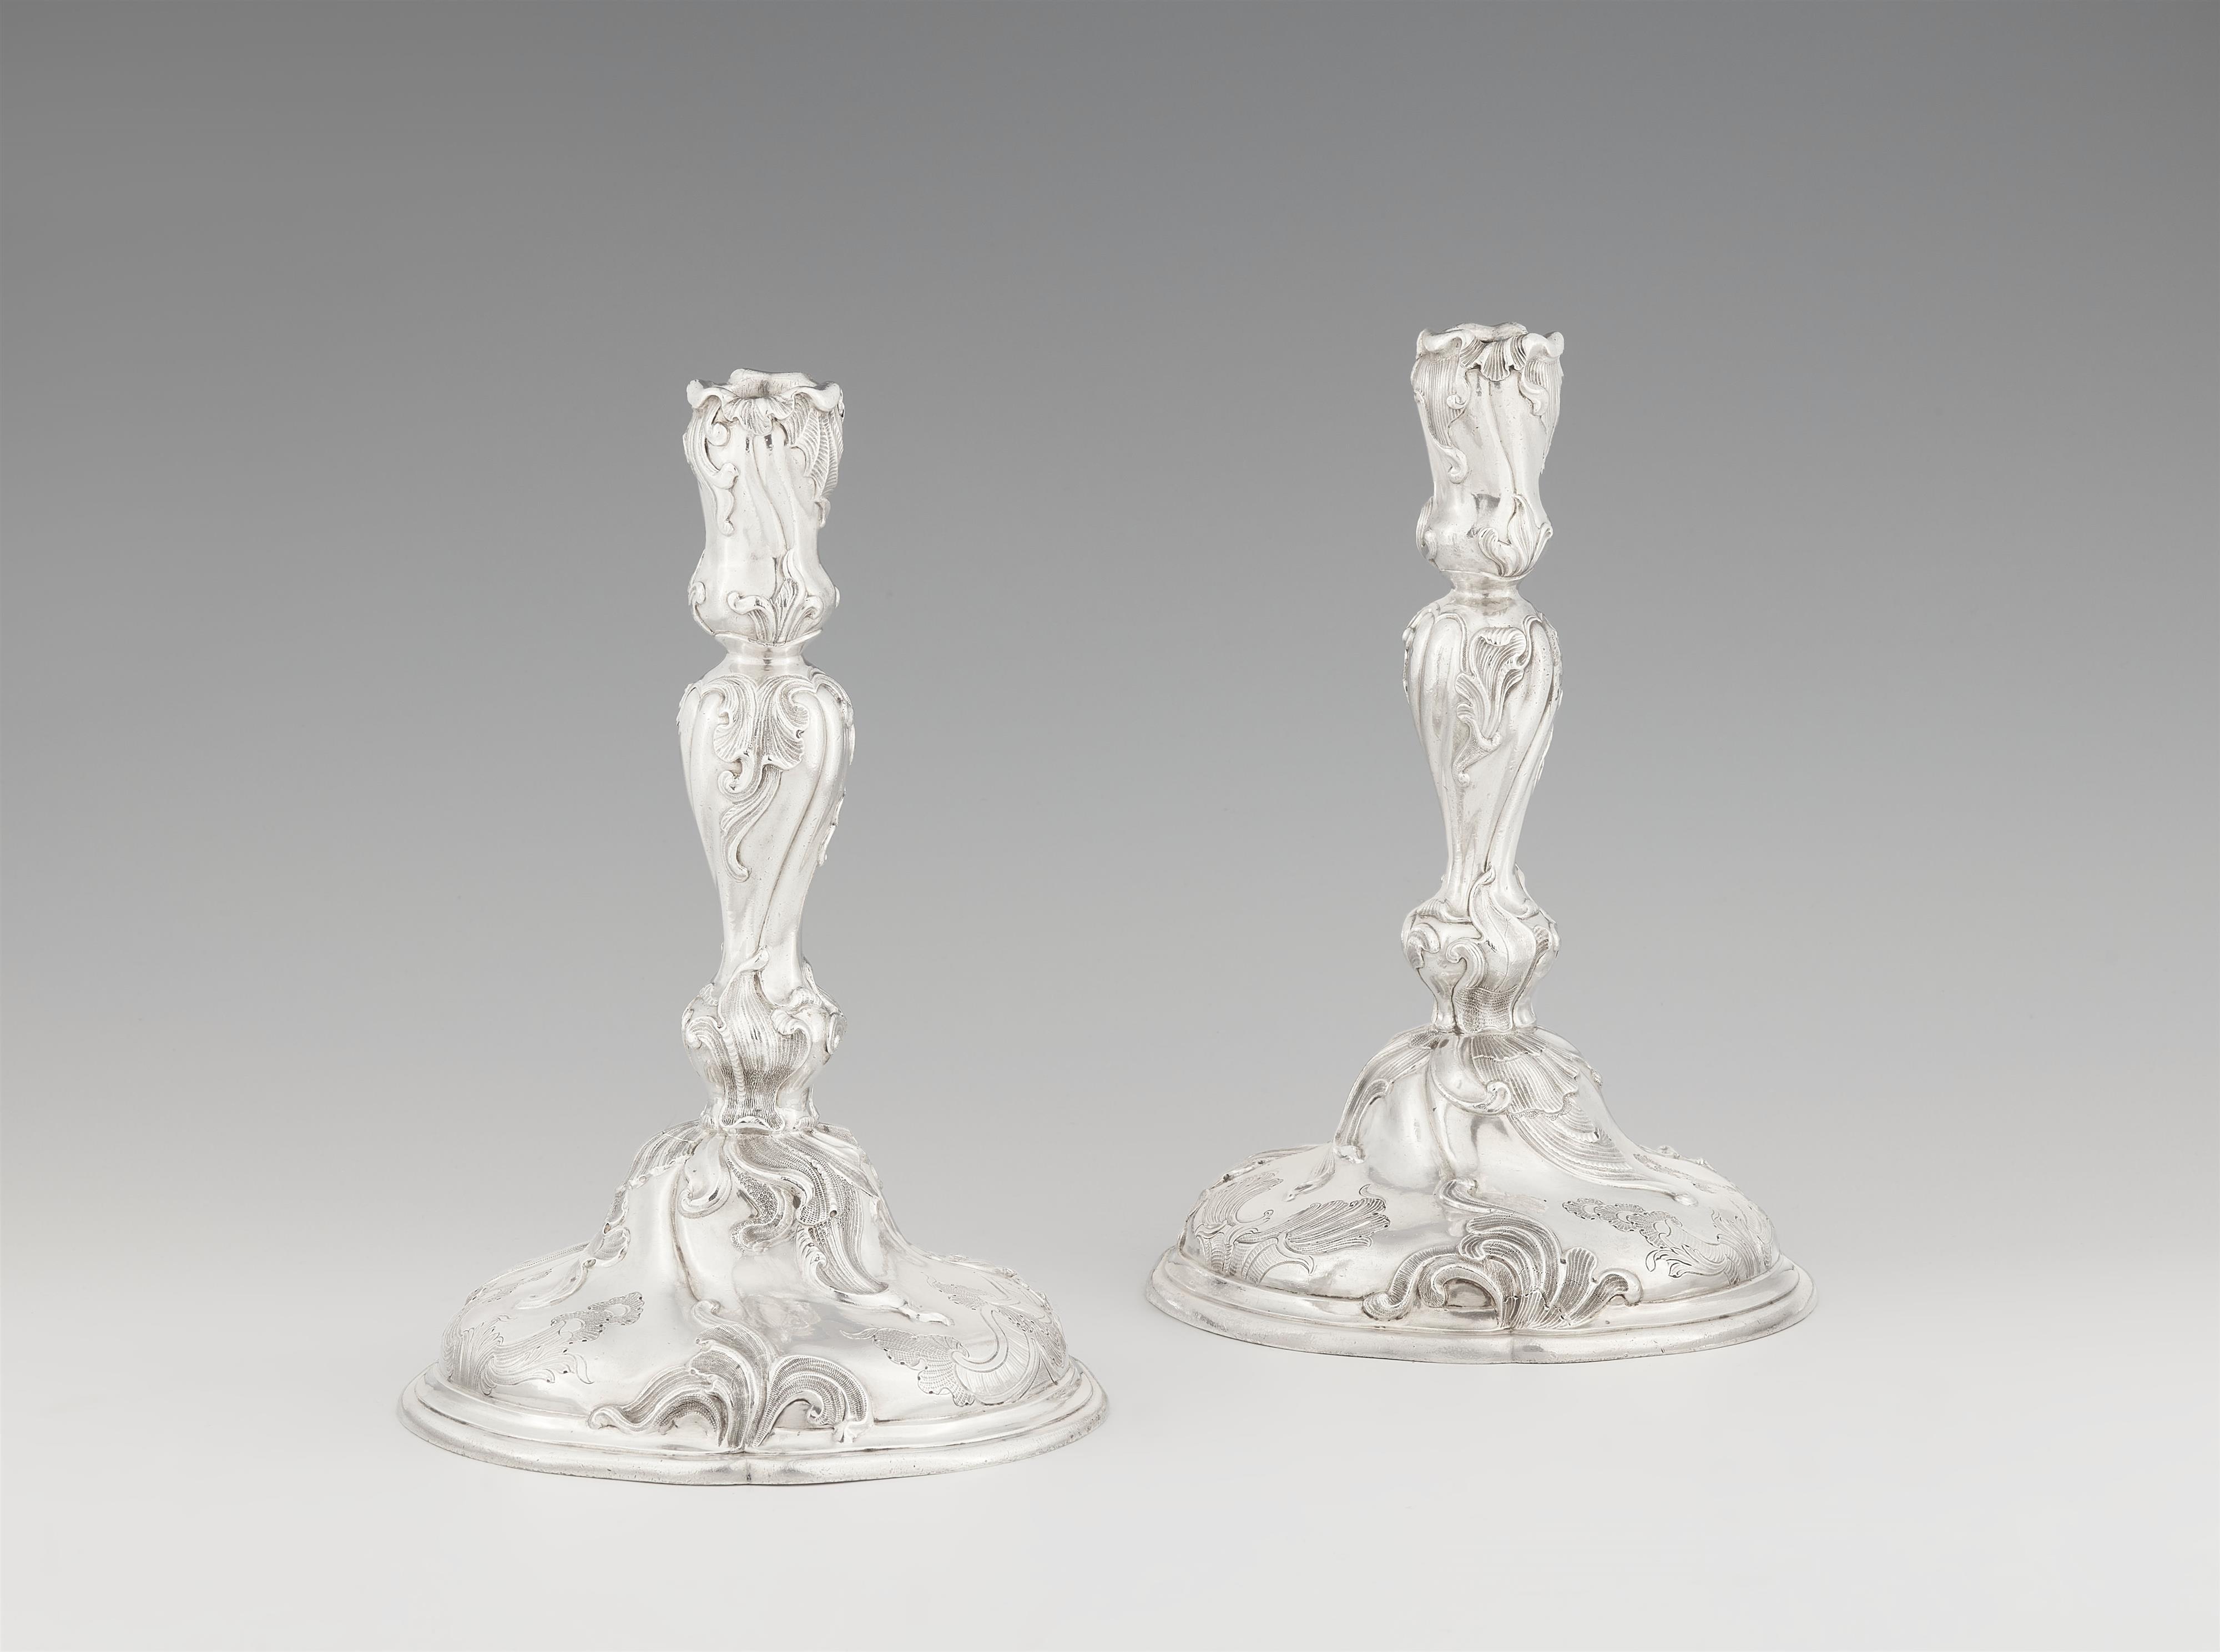 From the Dresden court silver:
A pair of candlesticks made for Prince Elector August II of Saxony - image-1